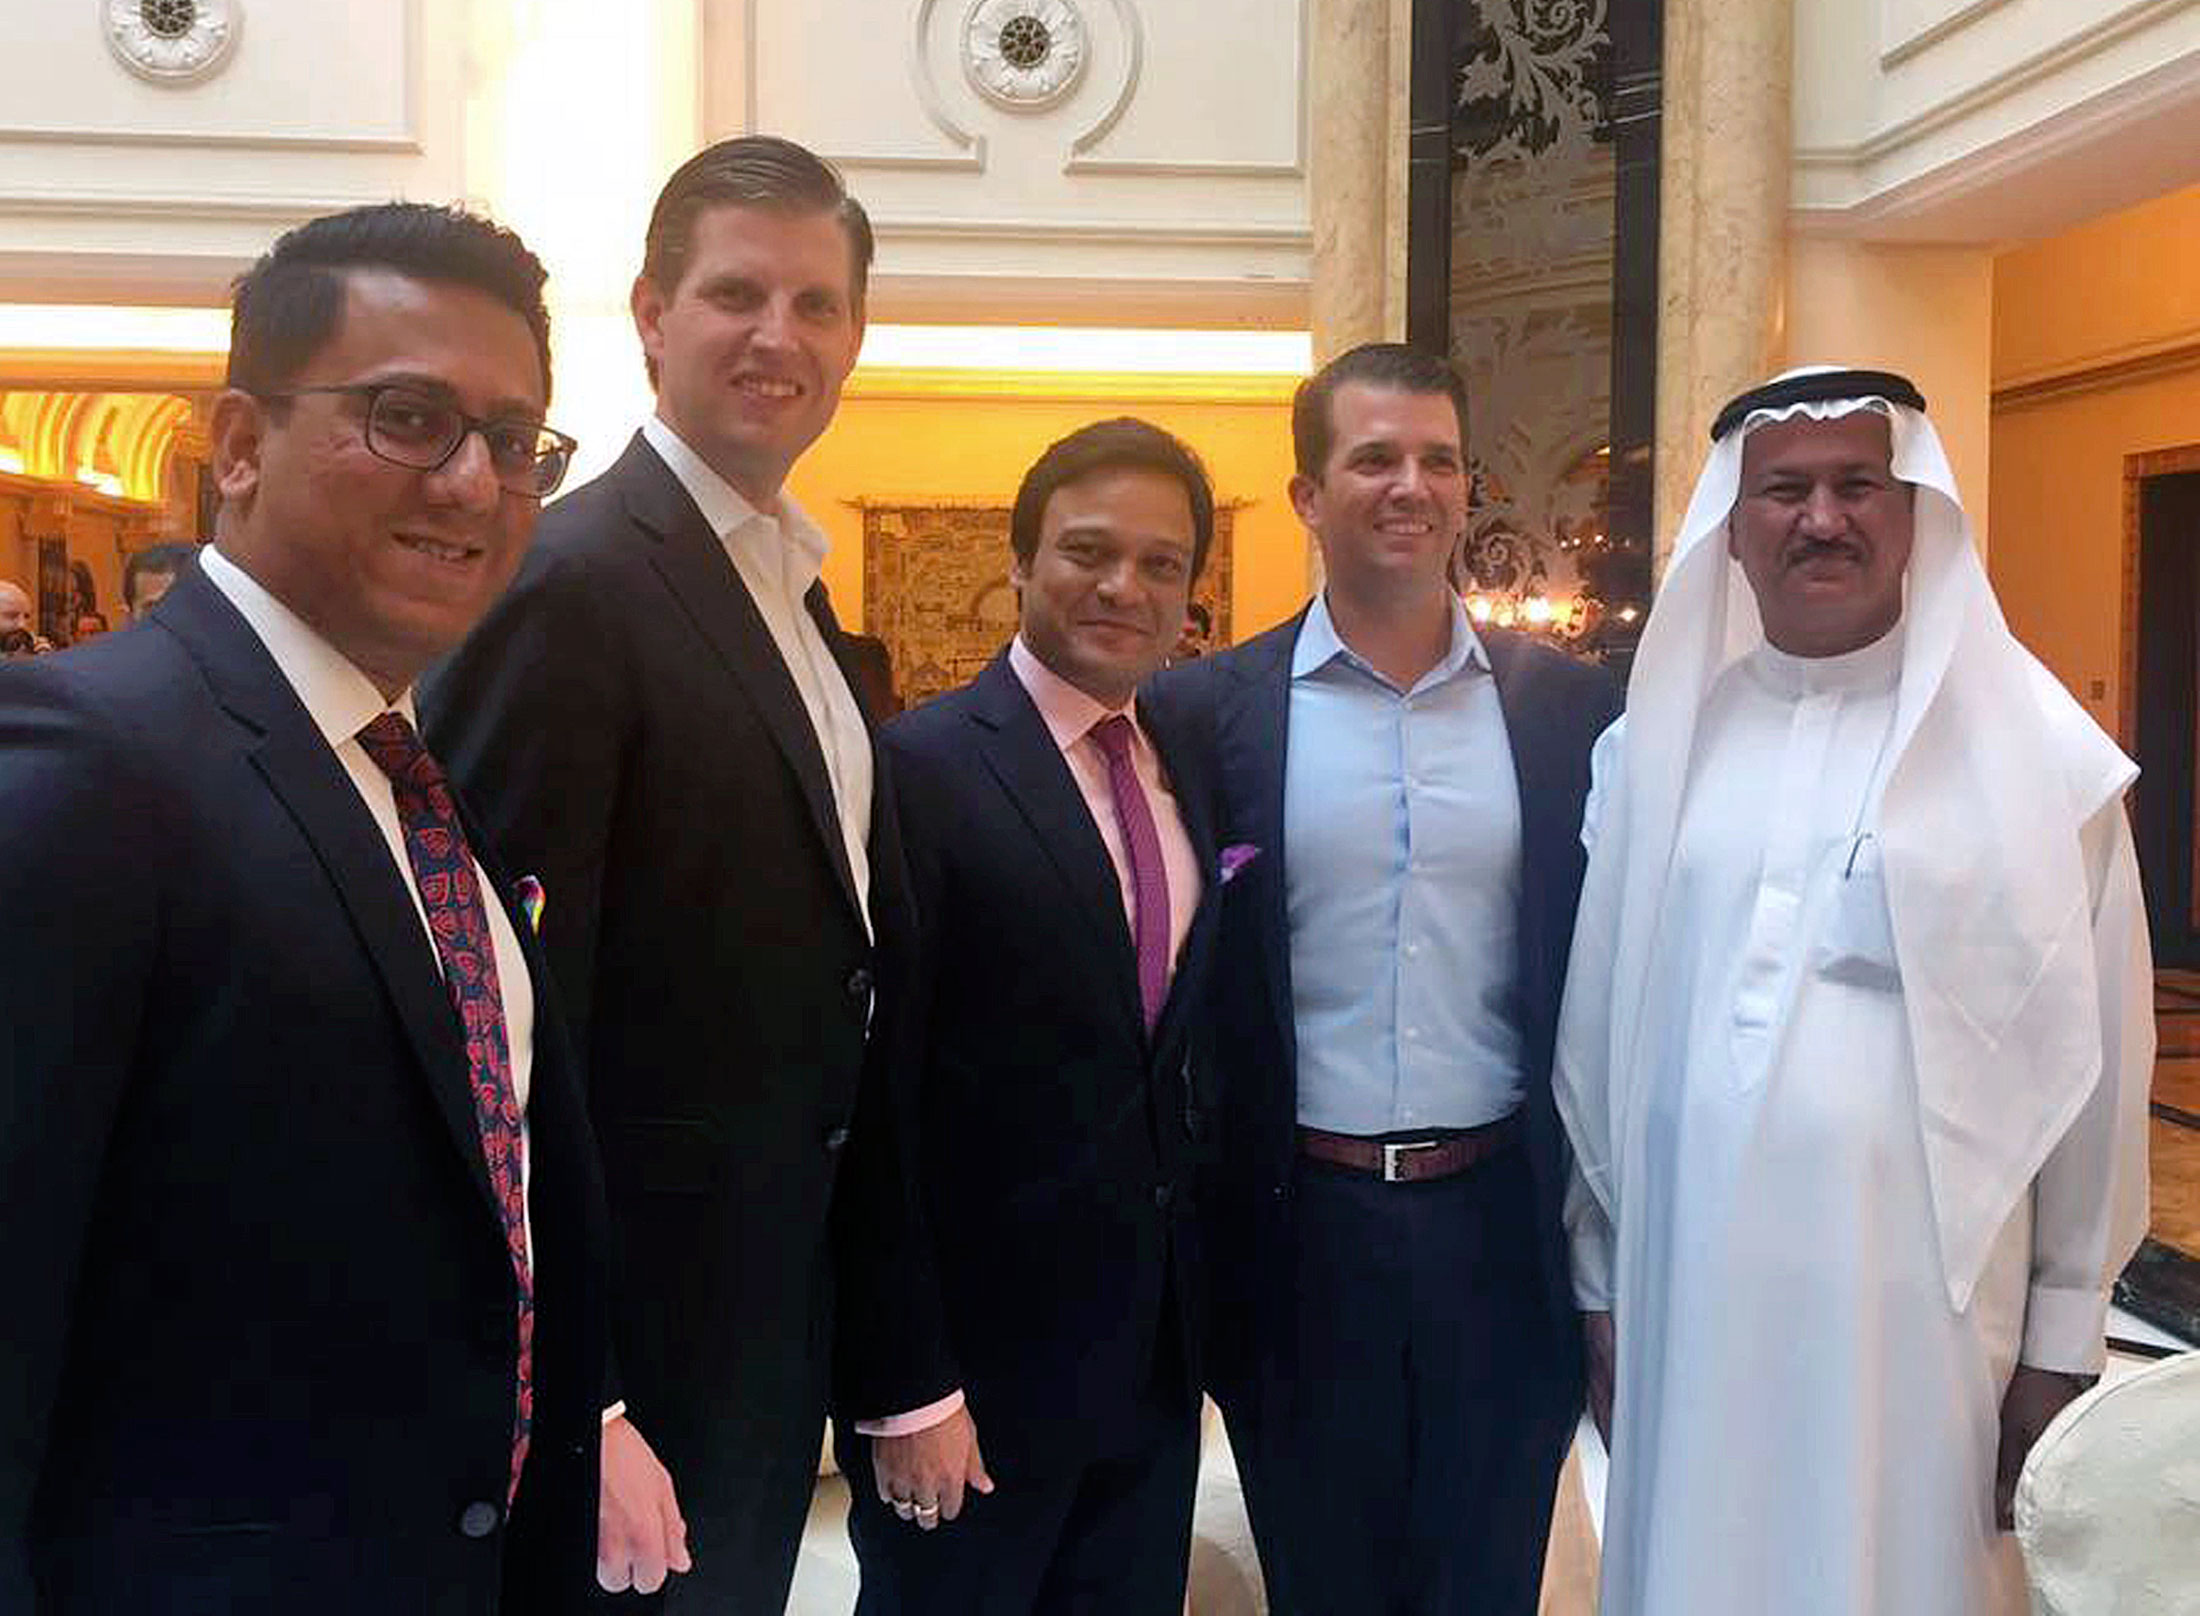 Banke International director Niraj Masand, far left, poses for a photo with Eric Trump, second left, Banke International director Porush Jhunjhunwala, center, Donald Trump Jr., second right, and DAMAC Properties chairman Hussain Sajwani, during festivities marking the formal opening of the Trump International Golf Club, in Dubai, United Arab Emirates on Feb. 18.
